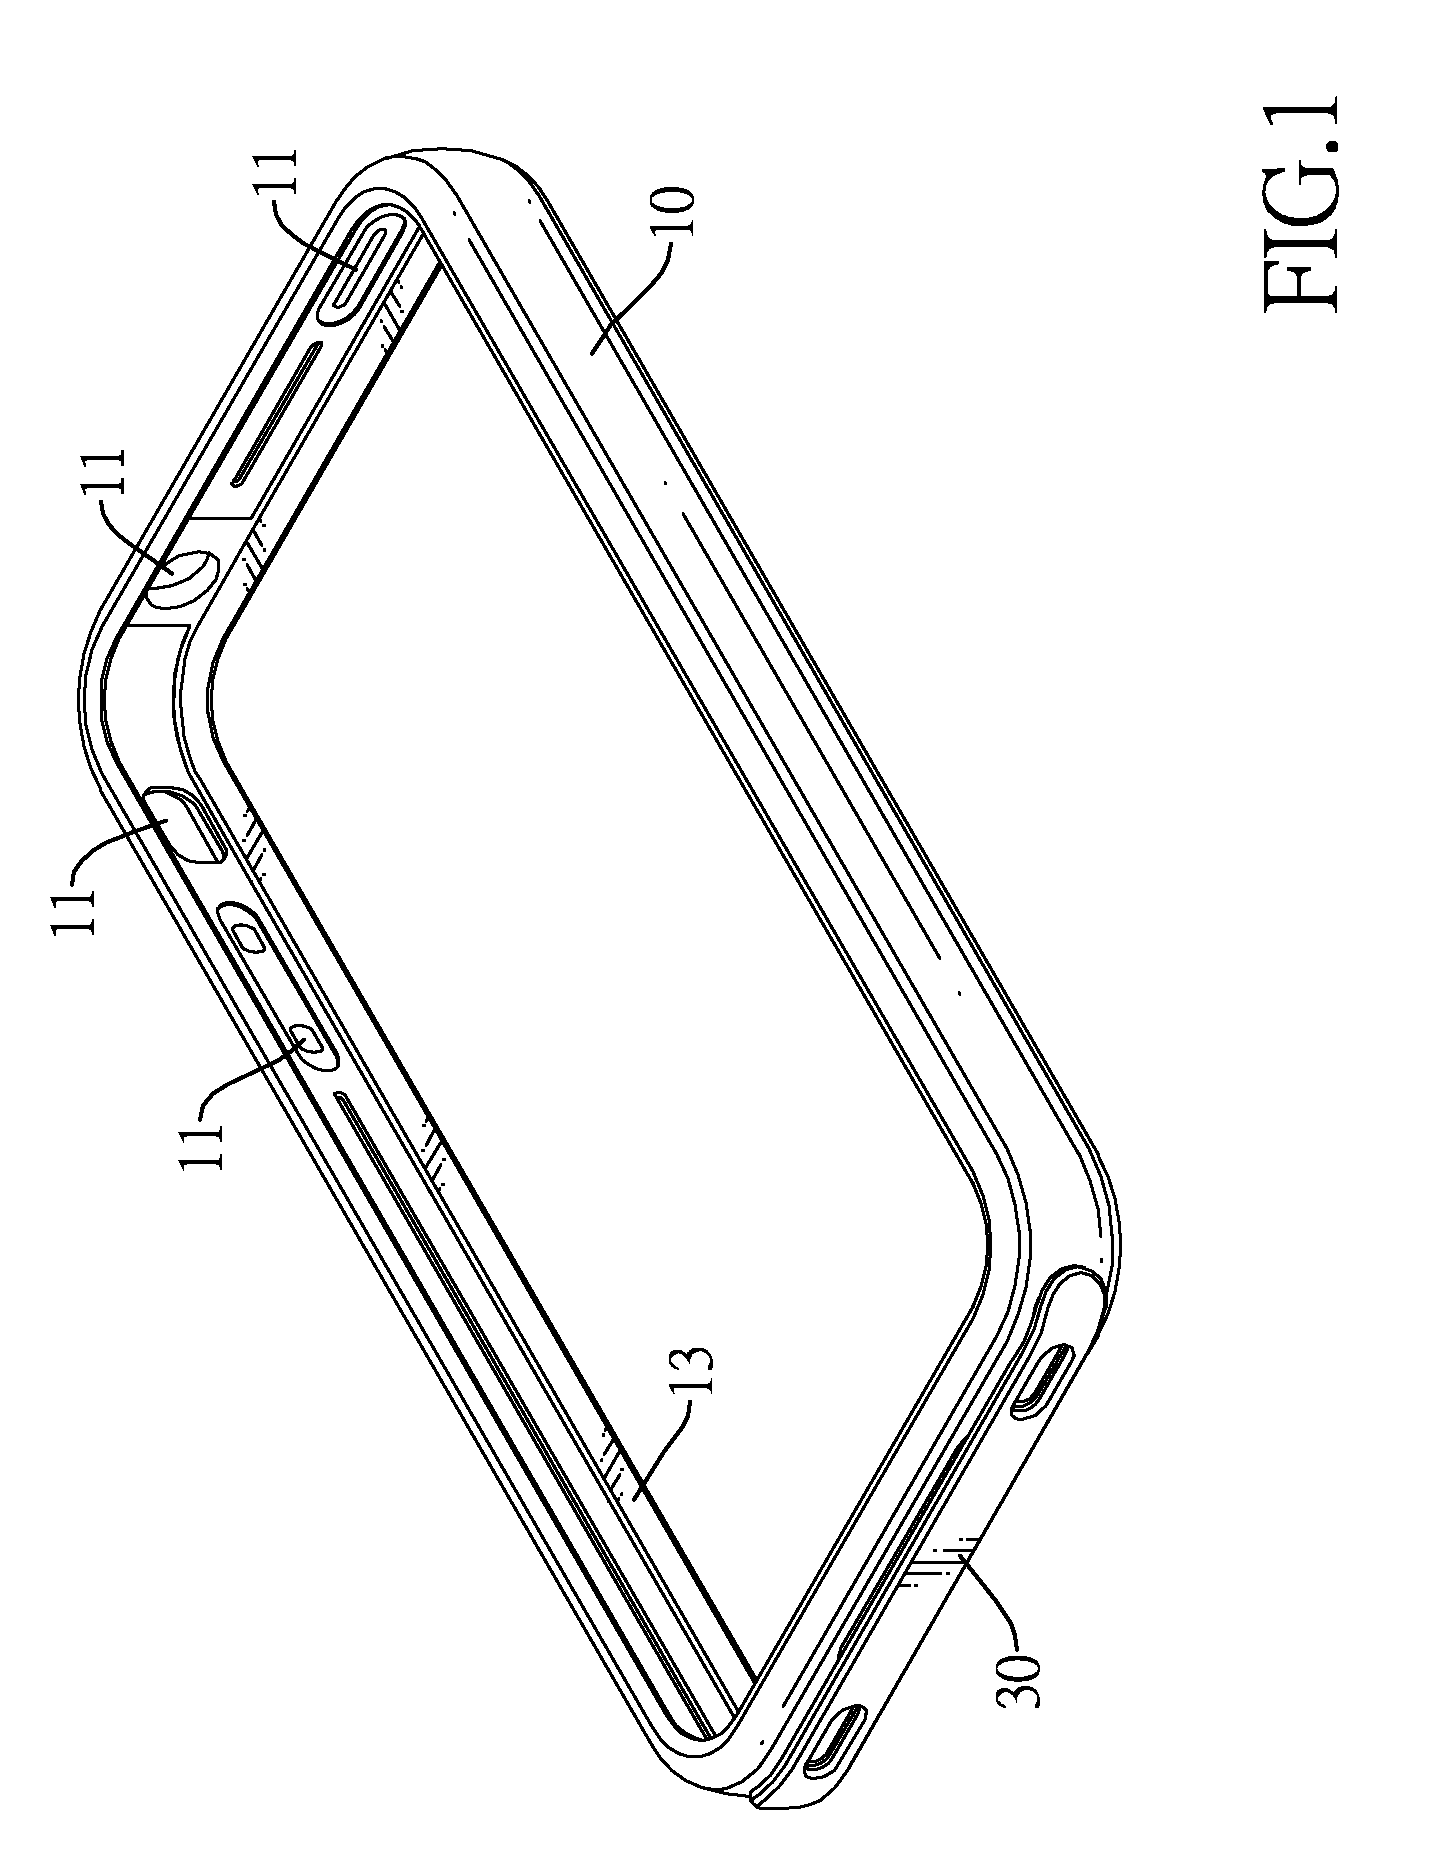 Protection frame for a portable device